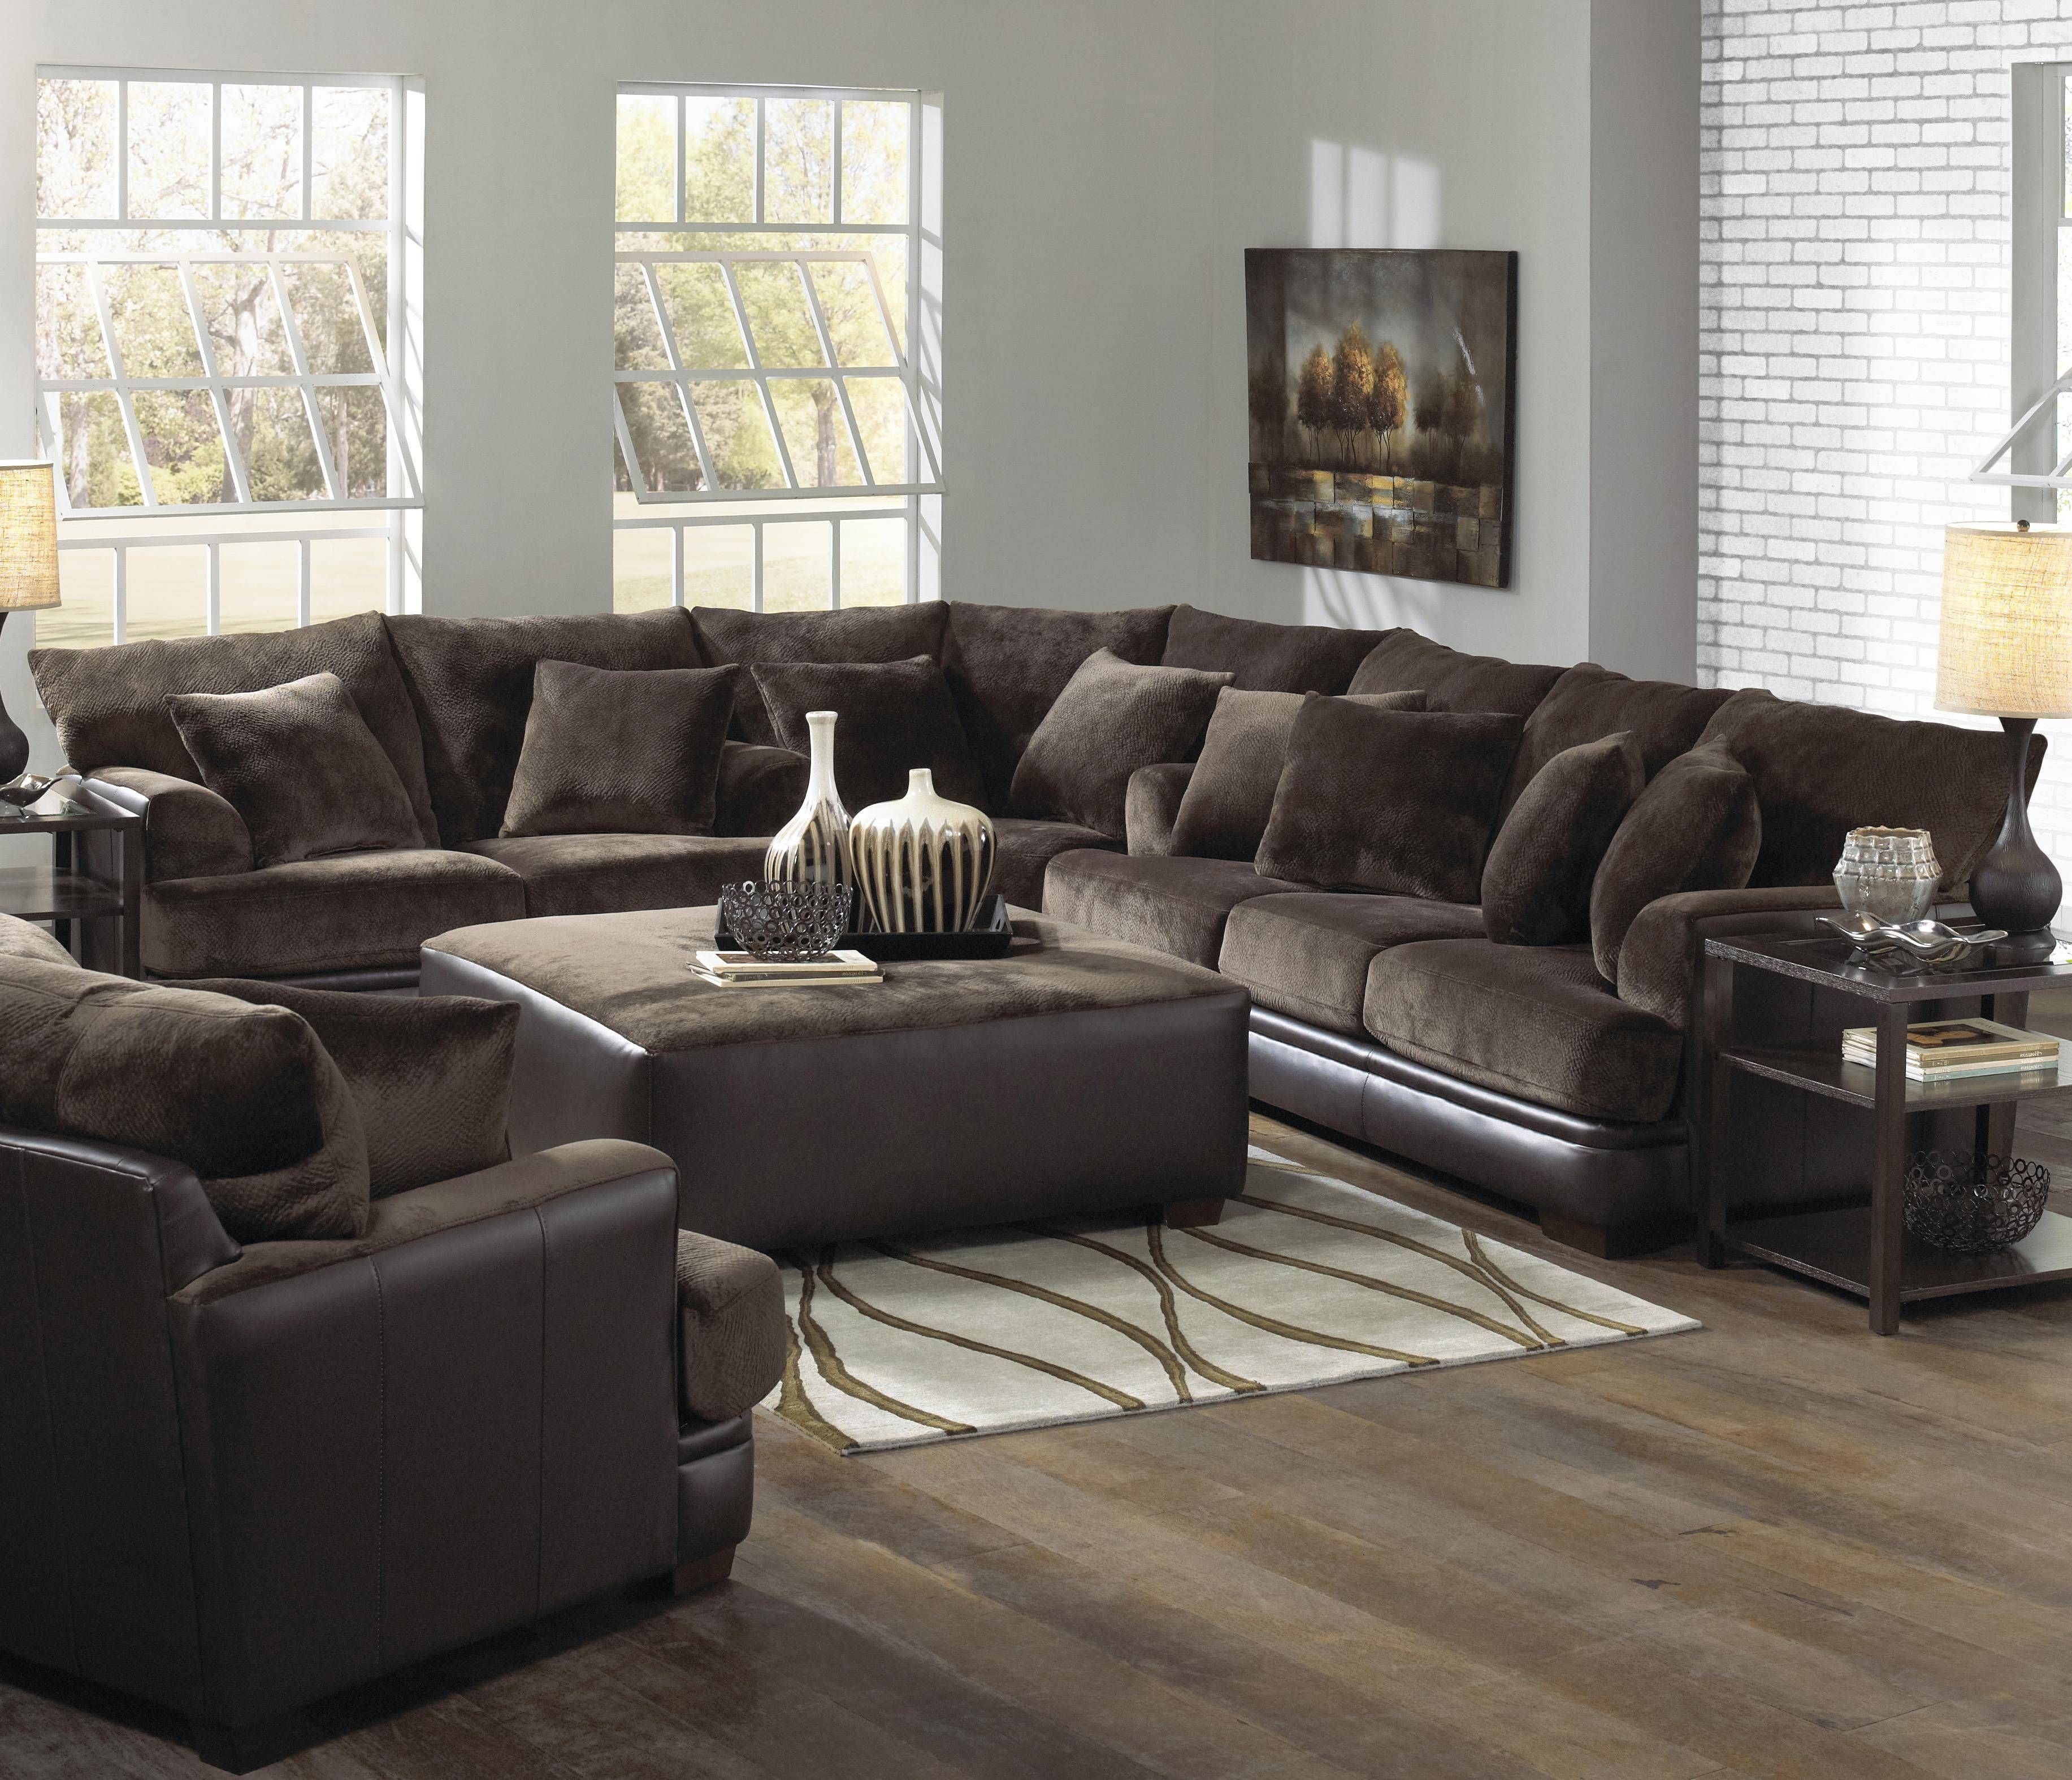 Furniture: Interesting Living Room Interior Using Large Sectional Intended For Extra Large Sectional Sofas (View 28 of 30)